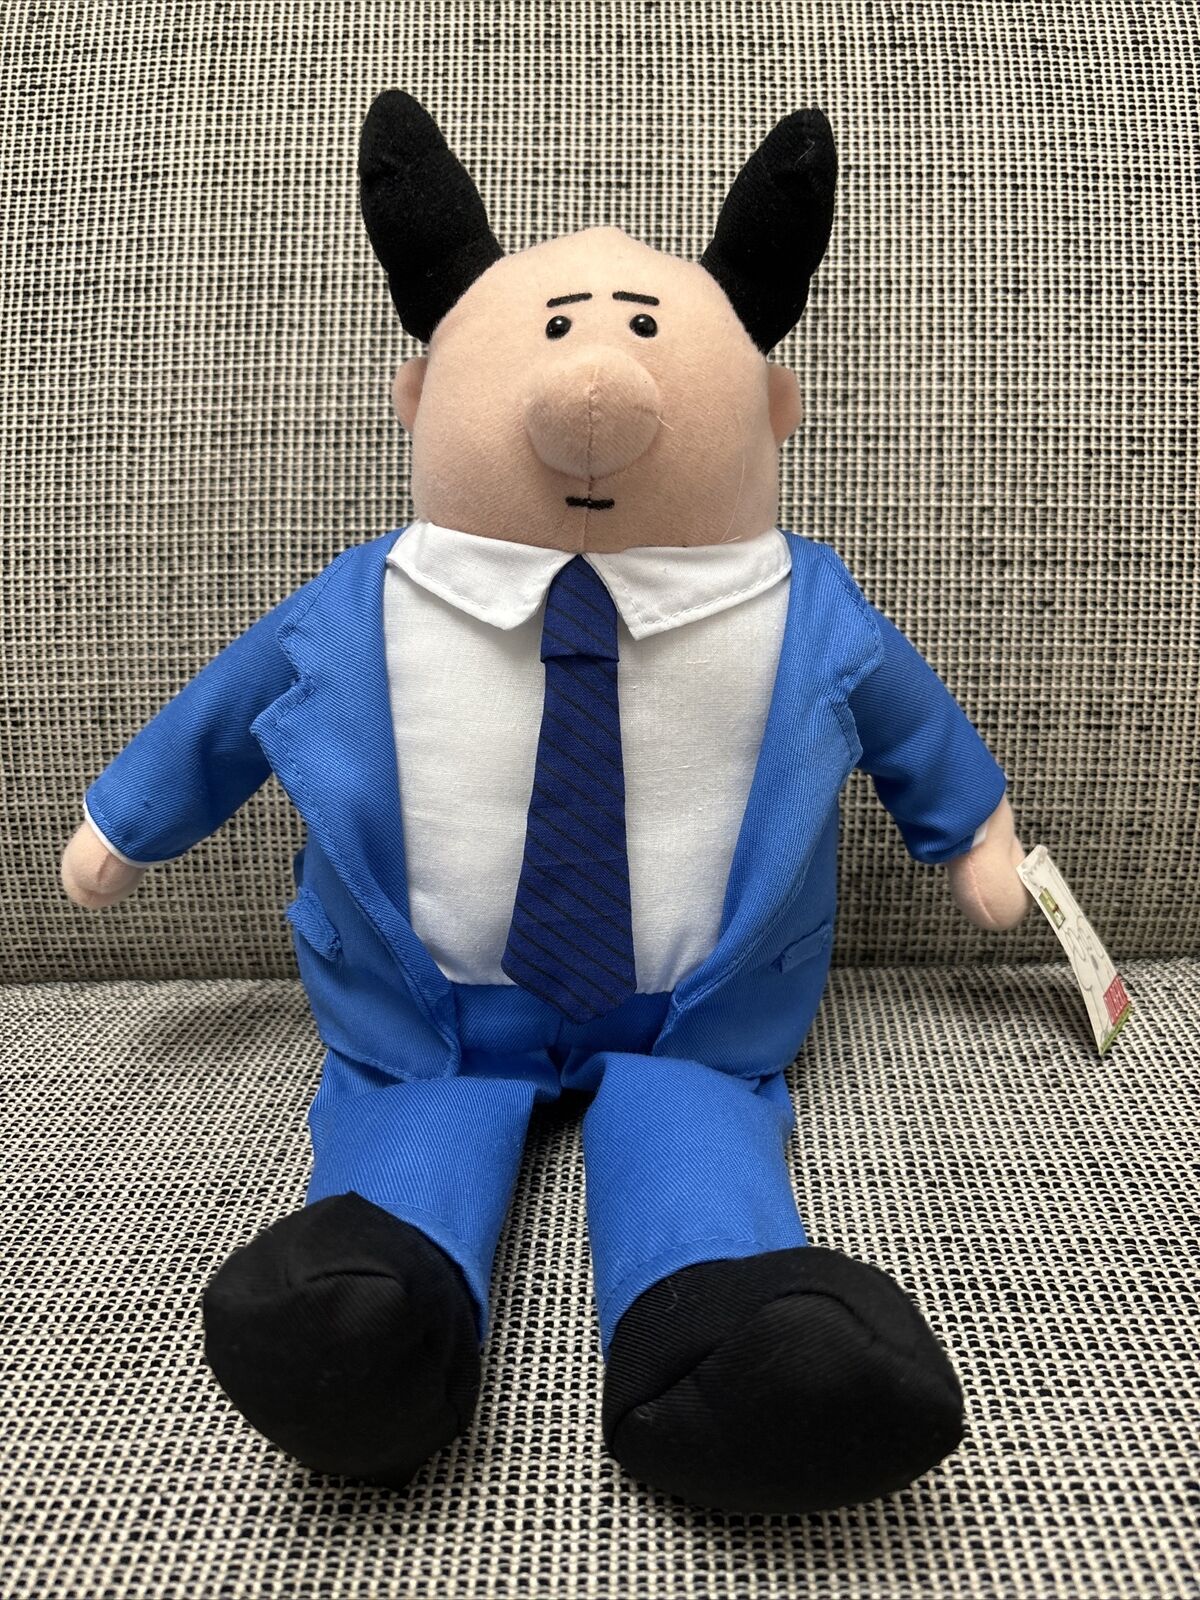 Toy Factory Dilbert The Boss Plush Stuffed Doll W Tags Pointy Hair Blue Suit 